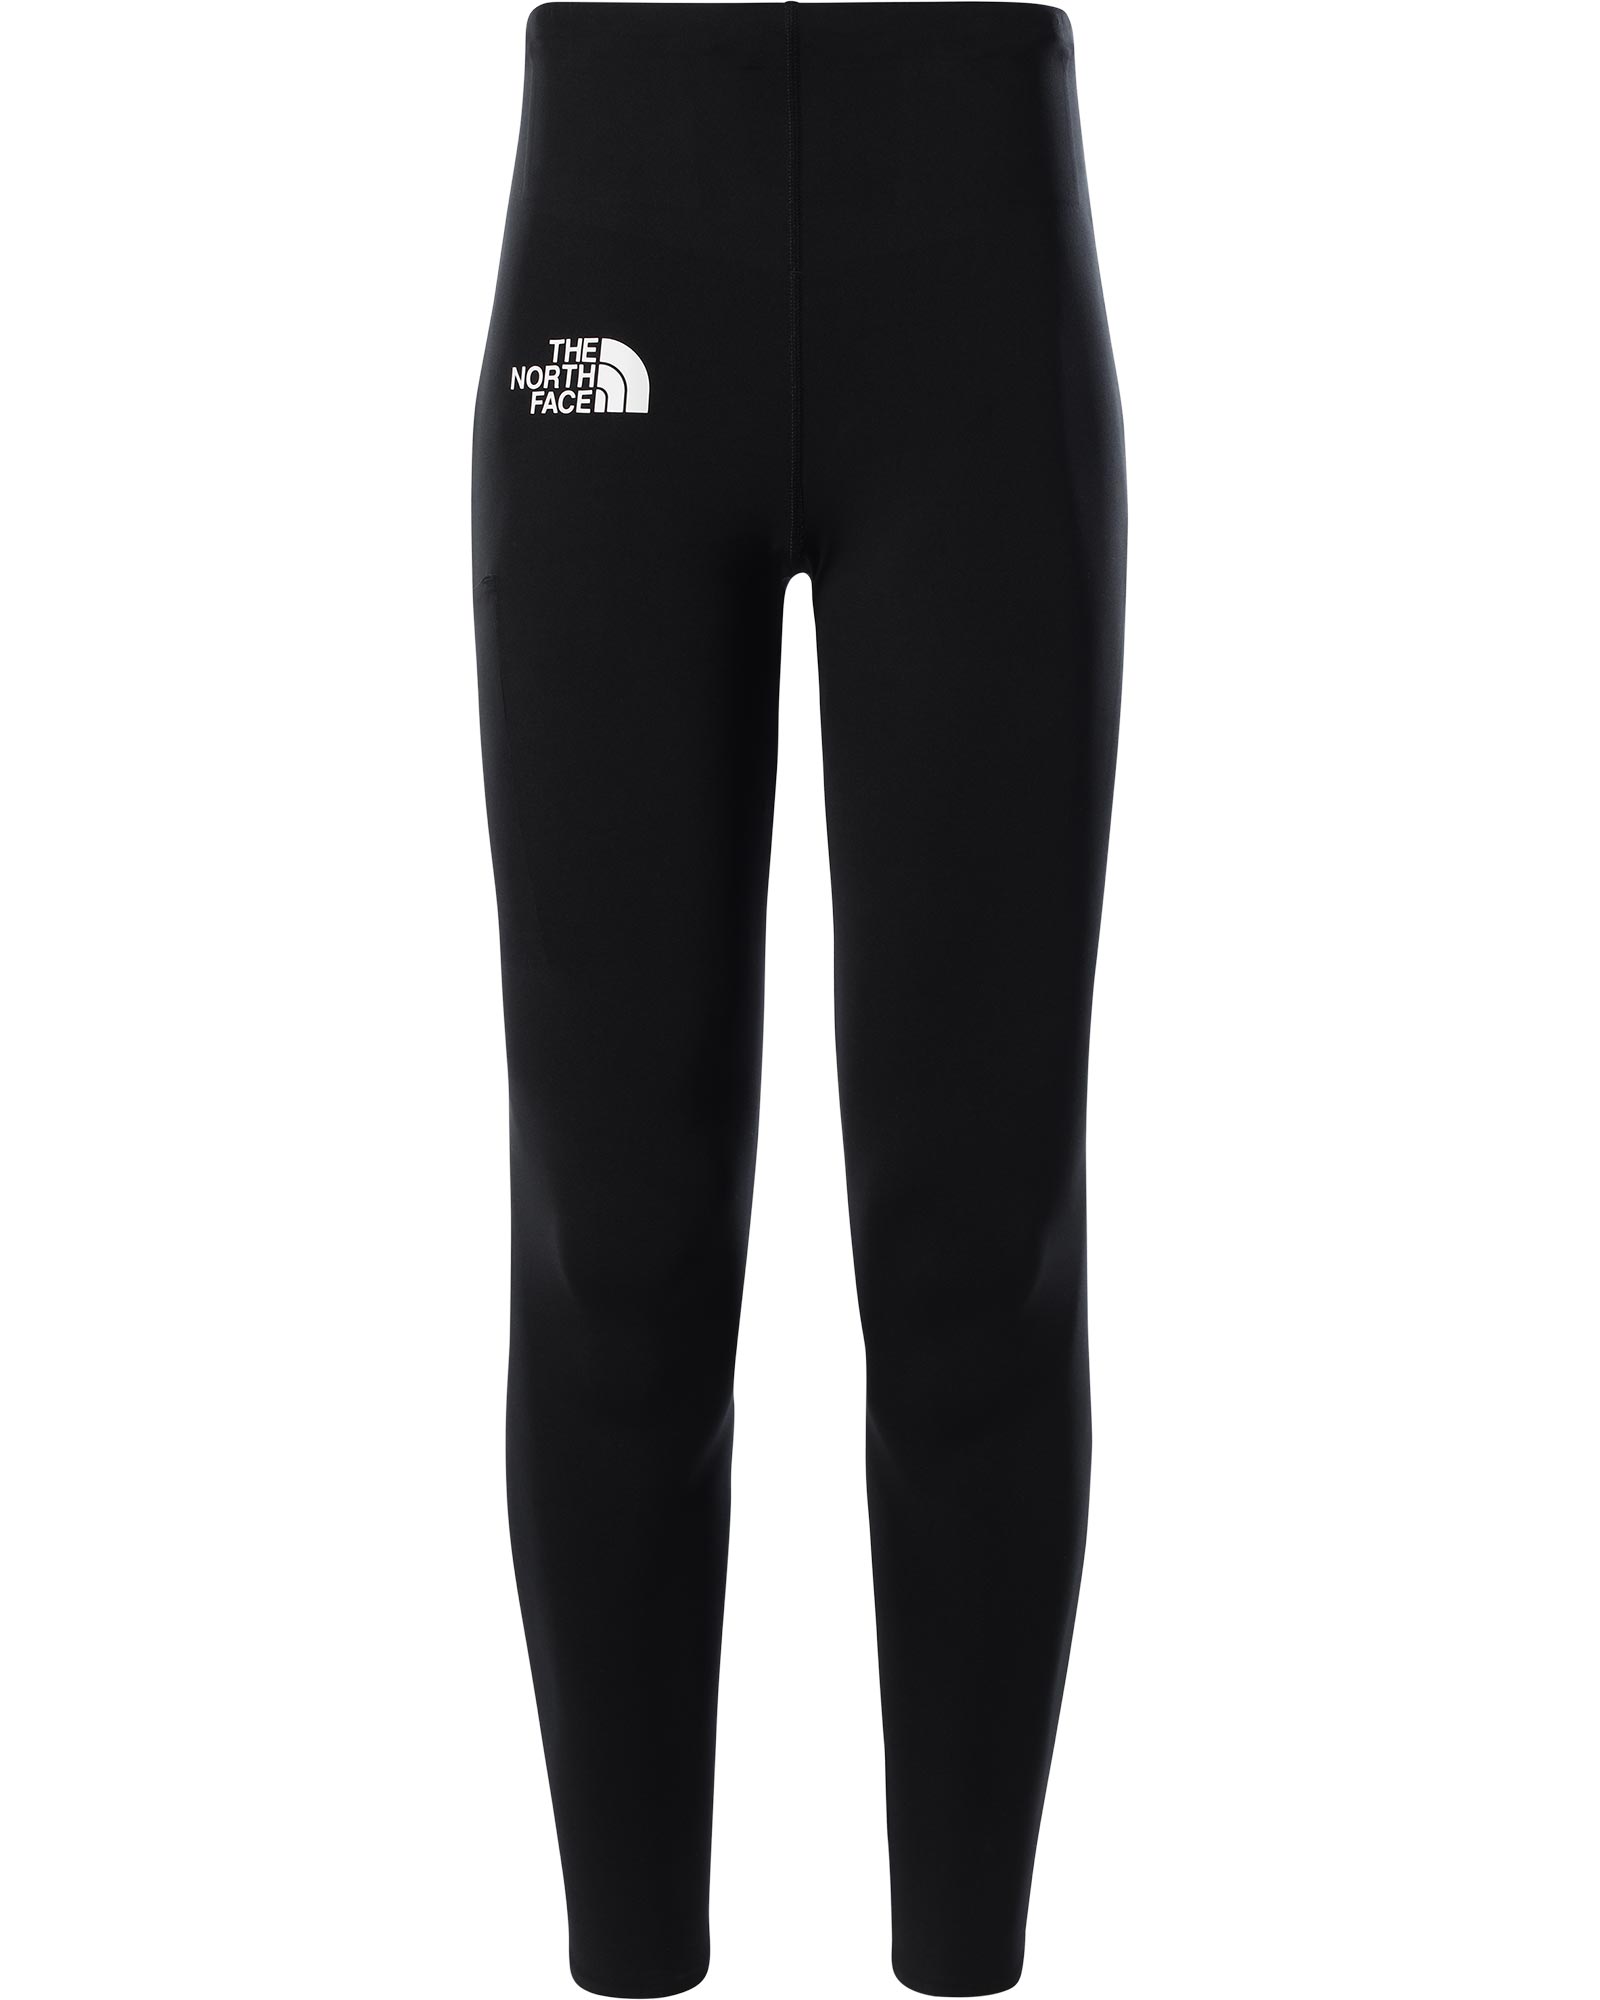 The North Face Flight Stridelight Women's Tights 0